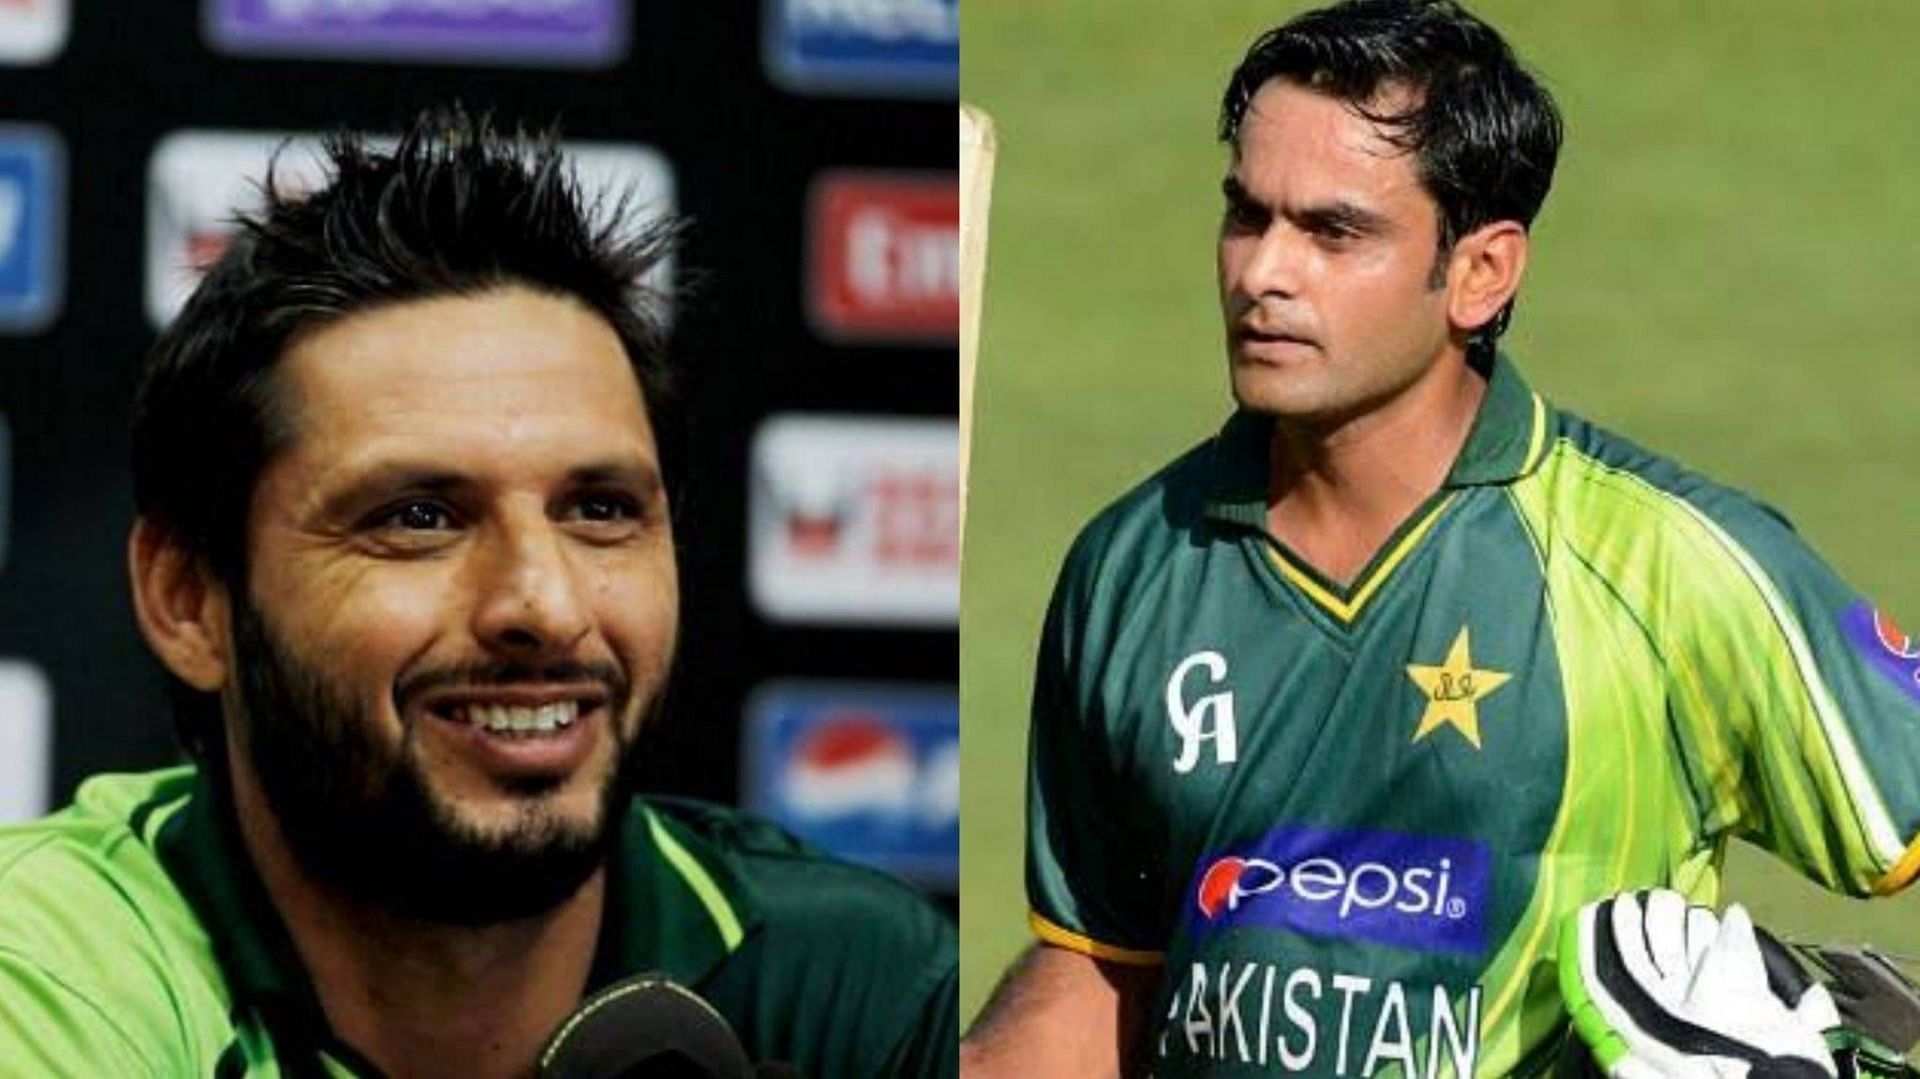 Mohammad Hafeez and Shahid Afridi played in Asia Cup 2012